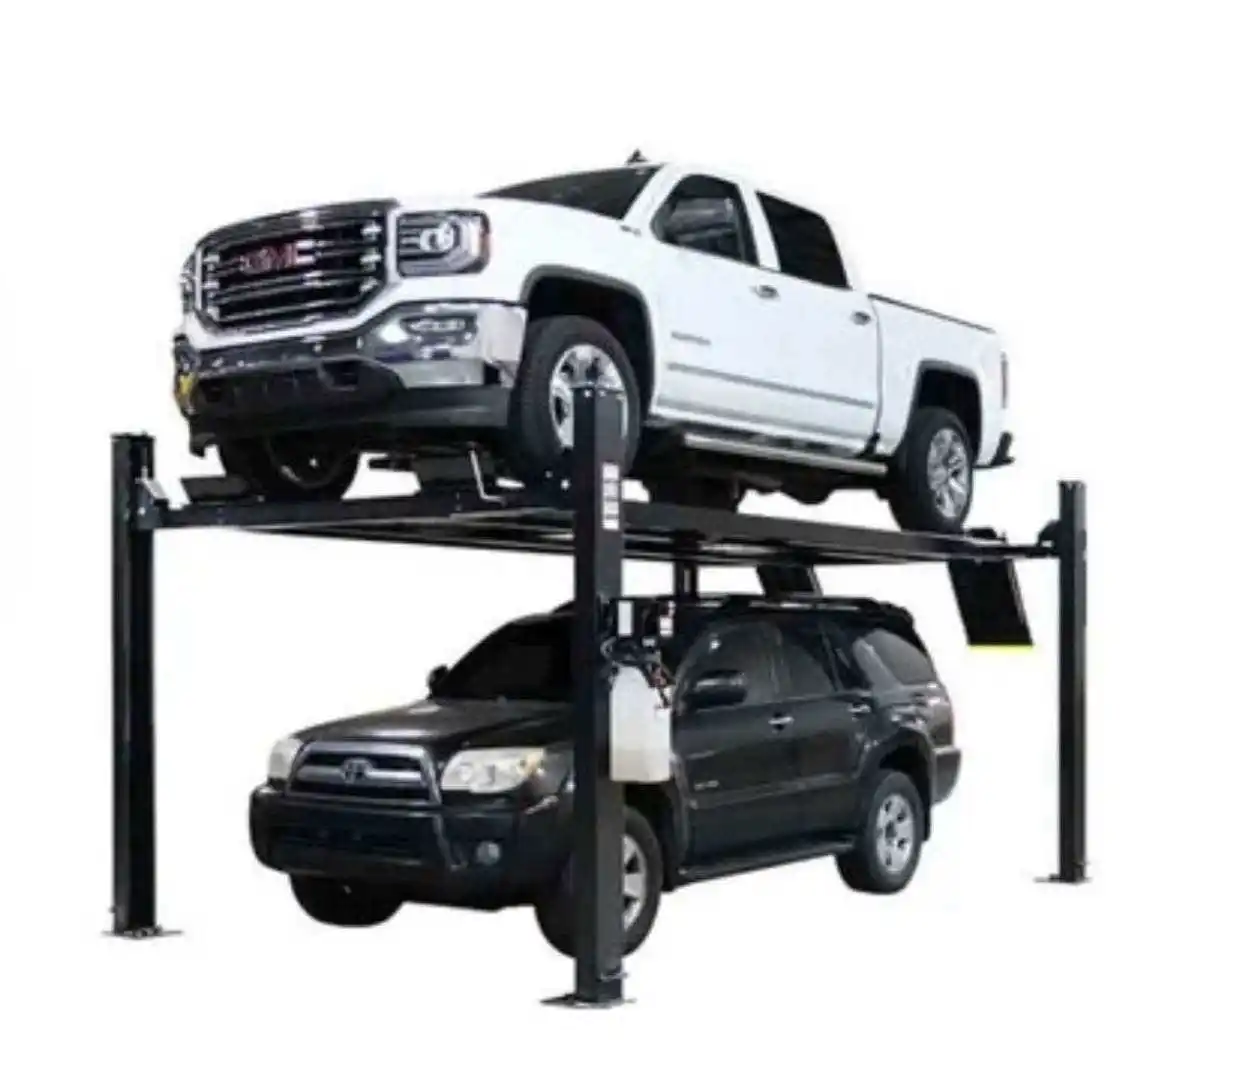 car lifts for home garage Four post car parking garage lift for car garage equipment  4 post lift